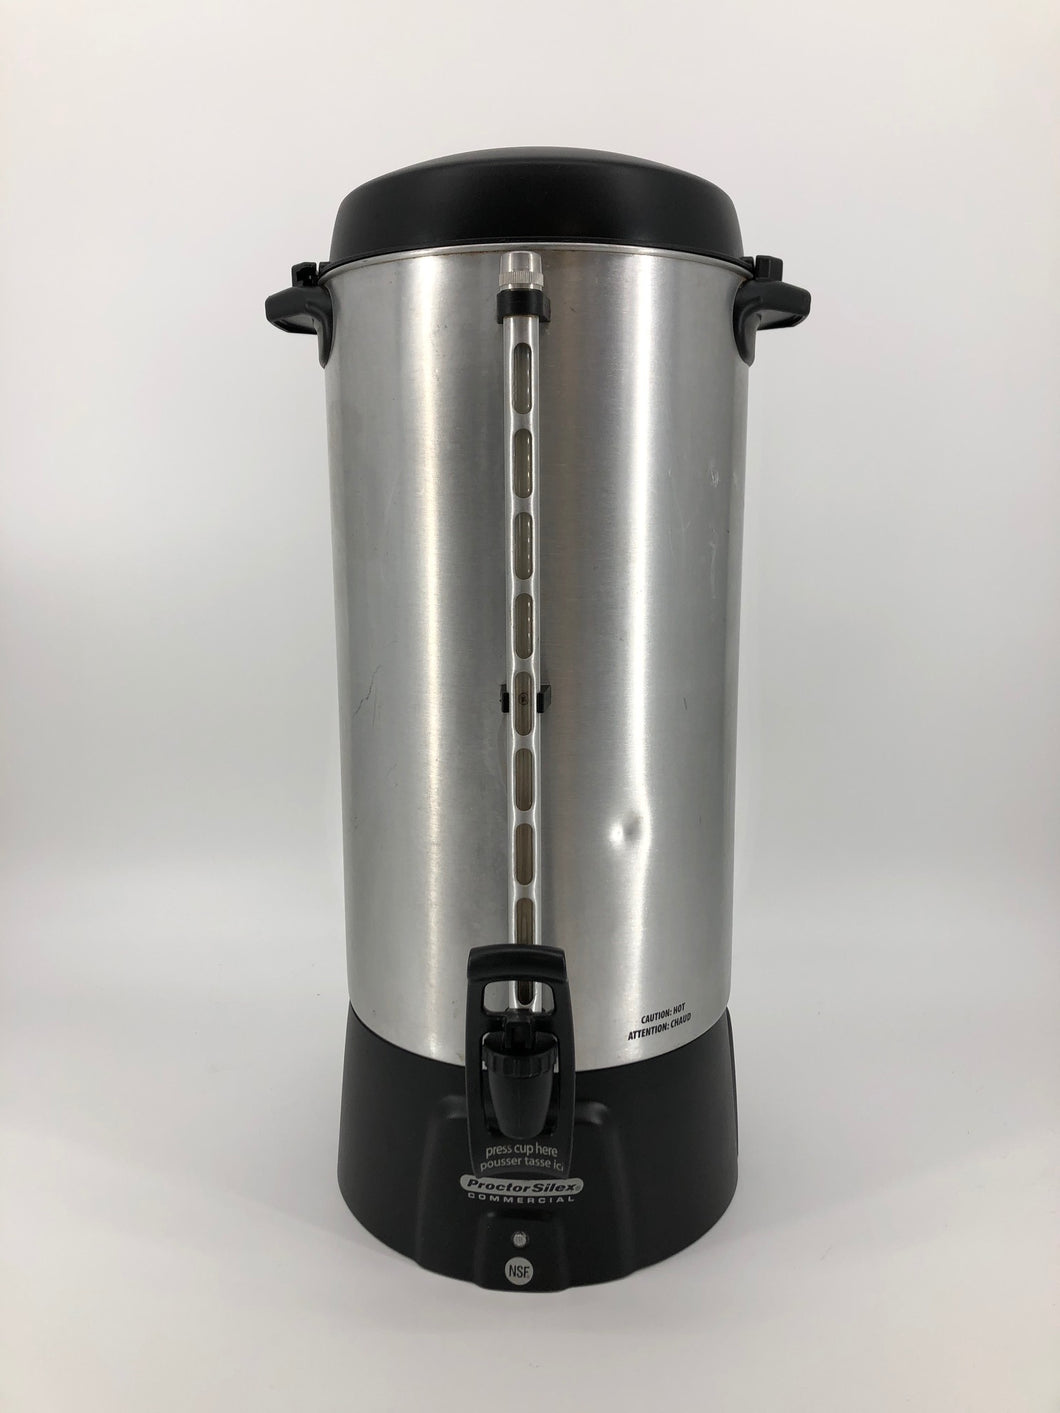 100 Cup Commercial Coffee Maker, Taylor True Value Rental of Rollinsford,  NH